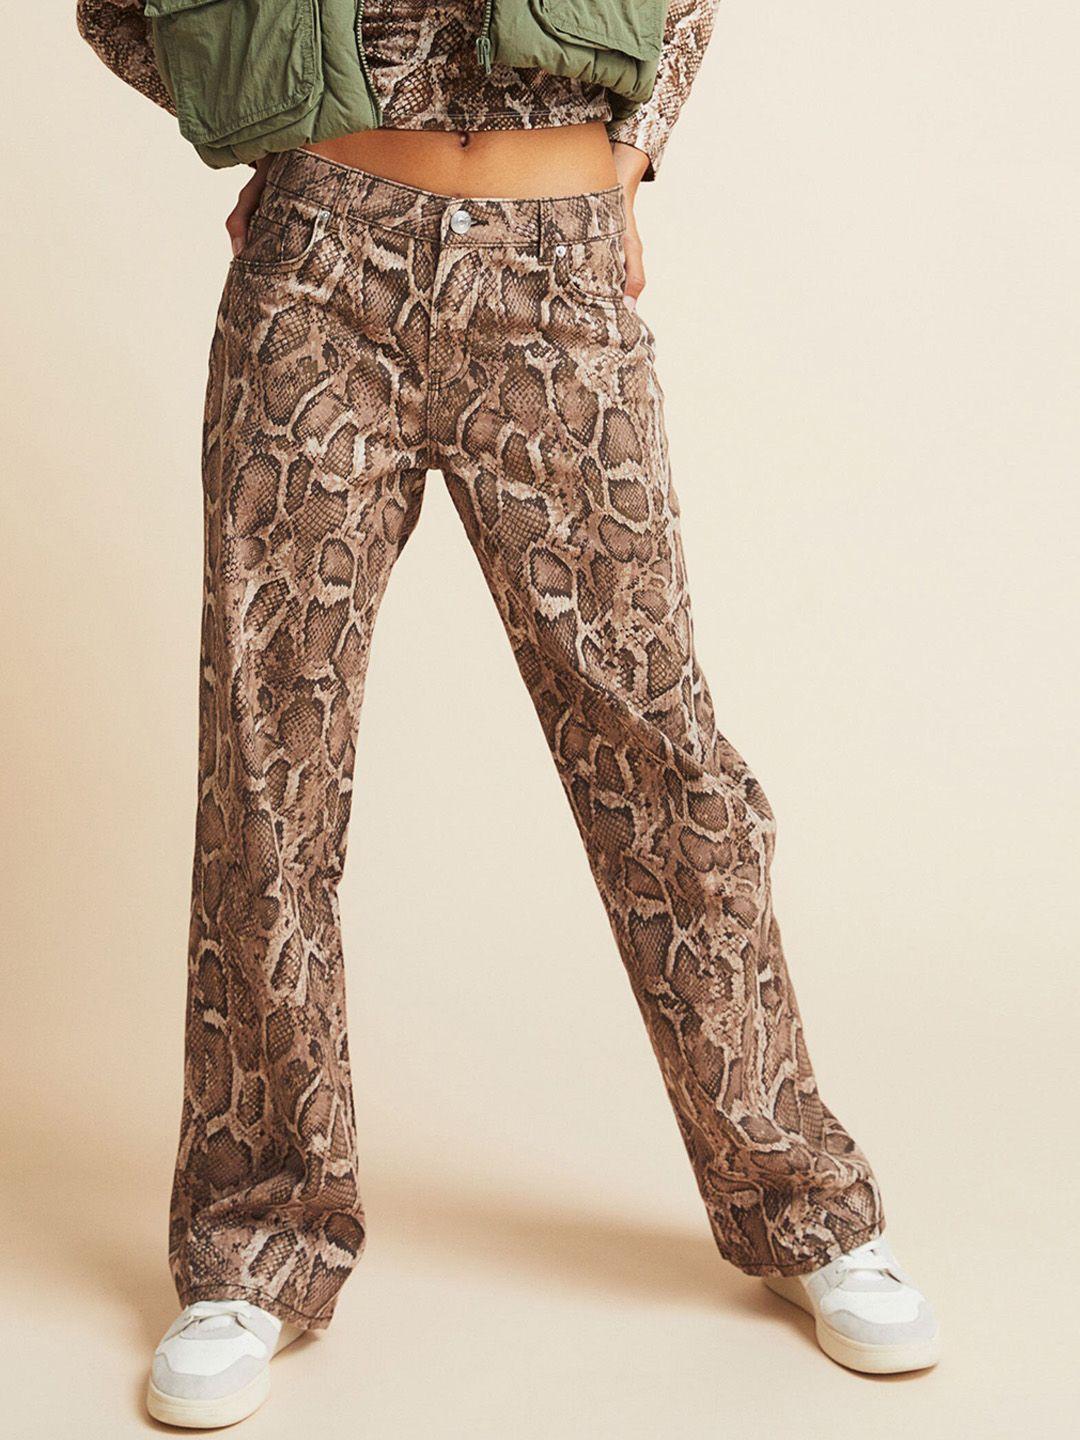 h&m women brown animal printed twill trousers